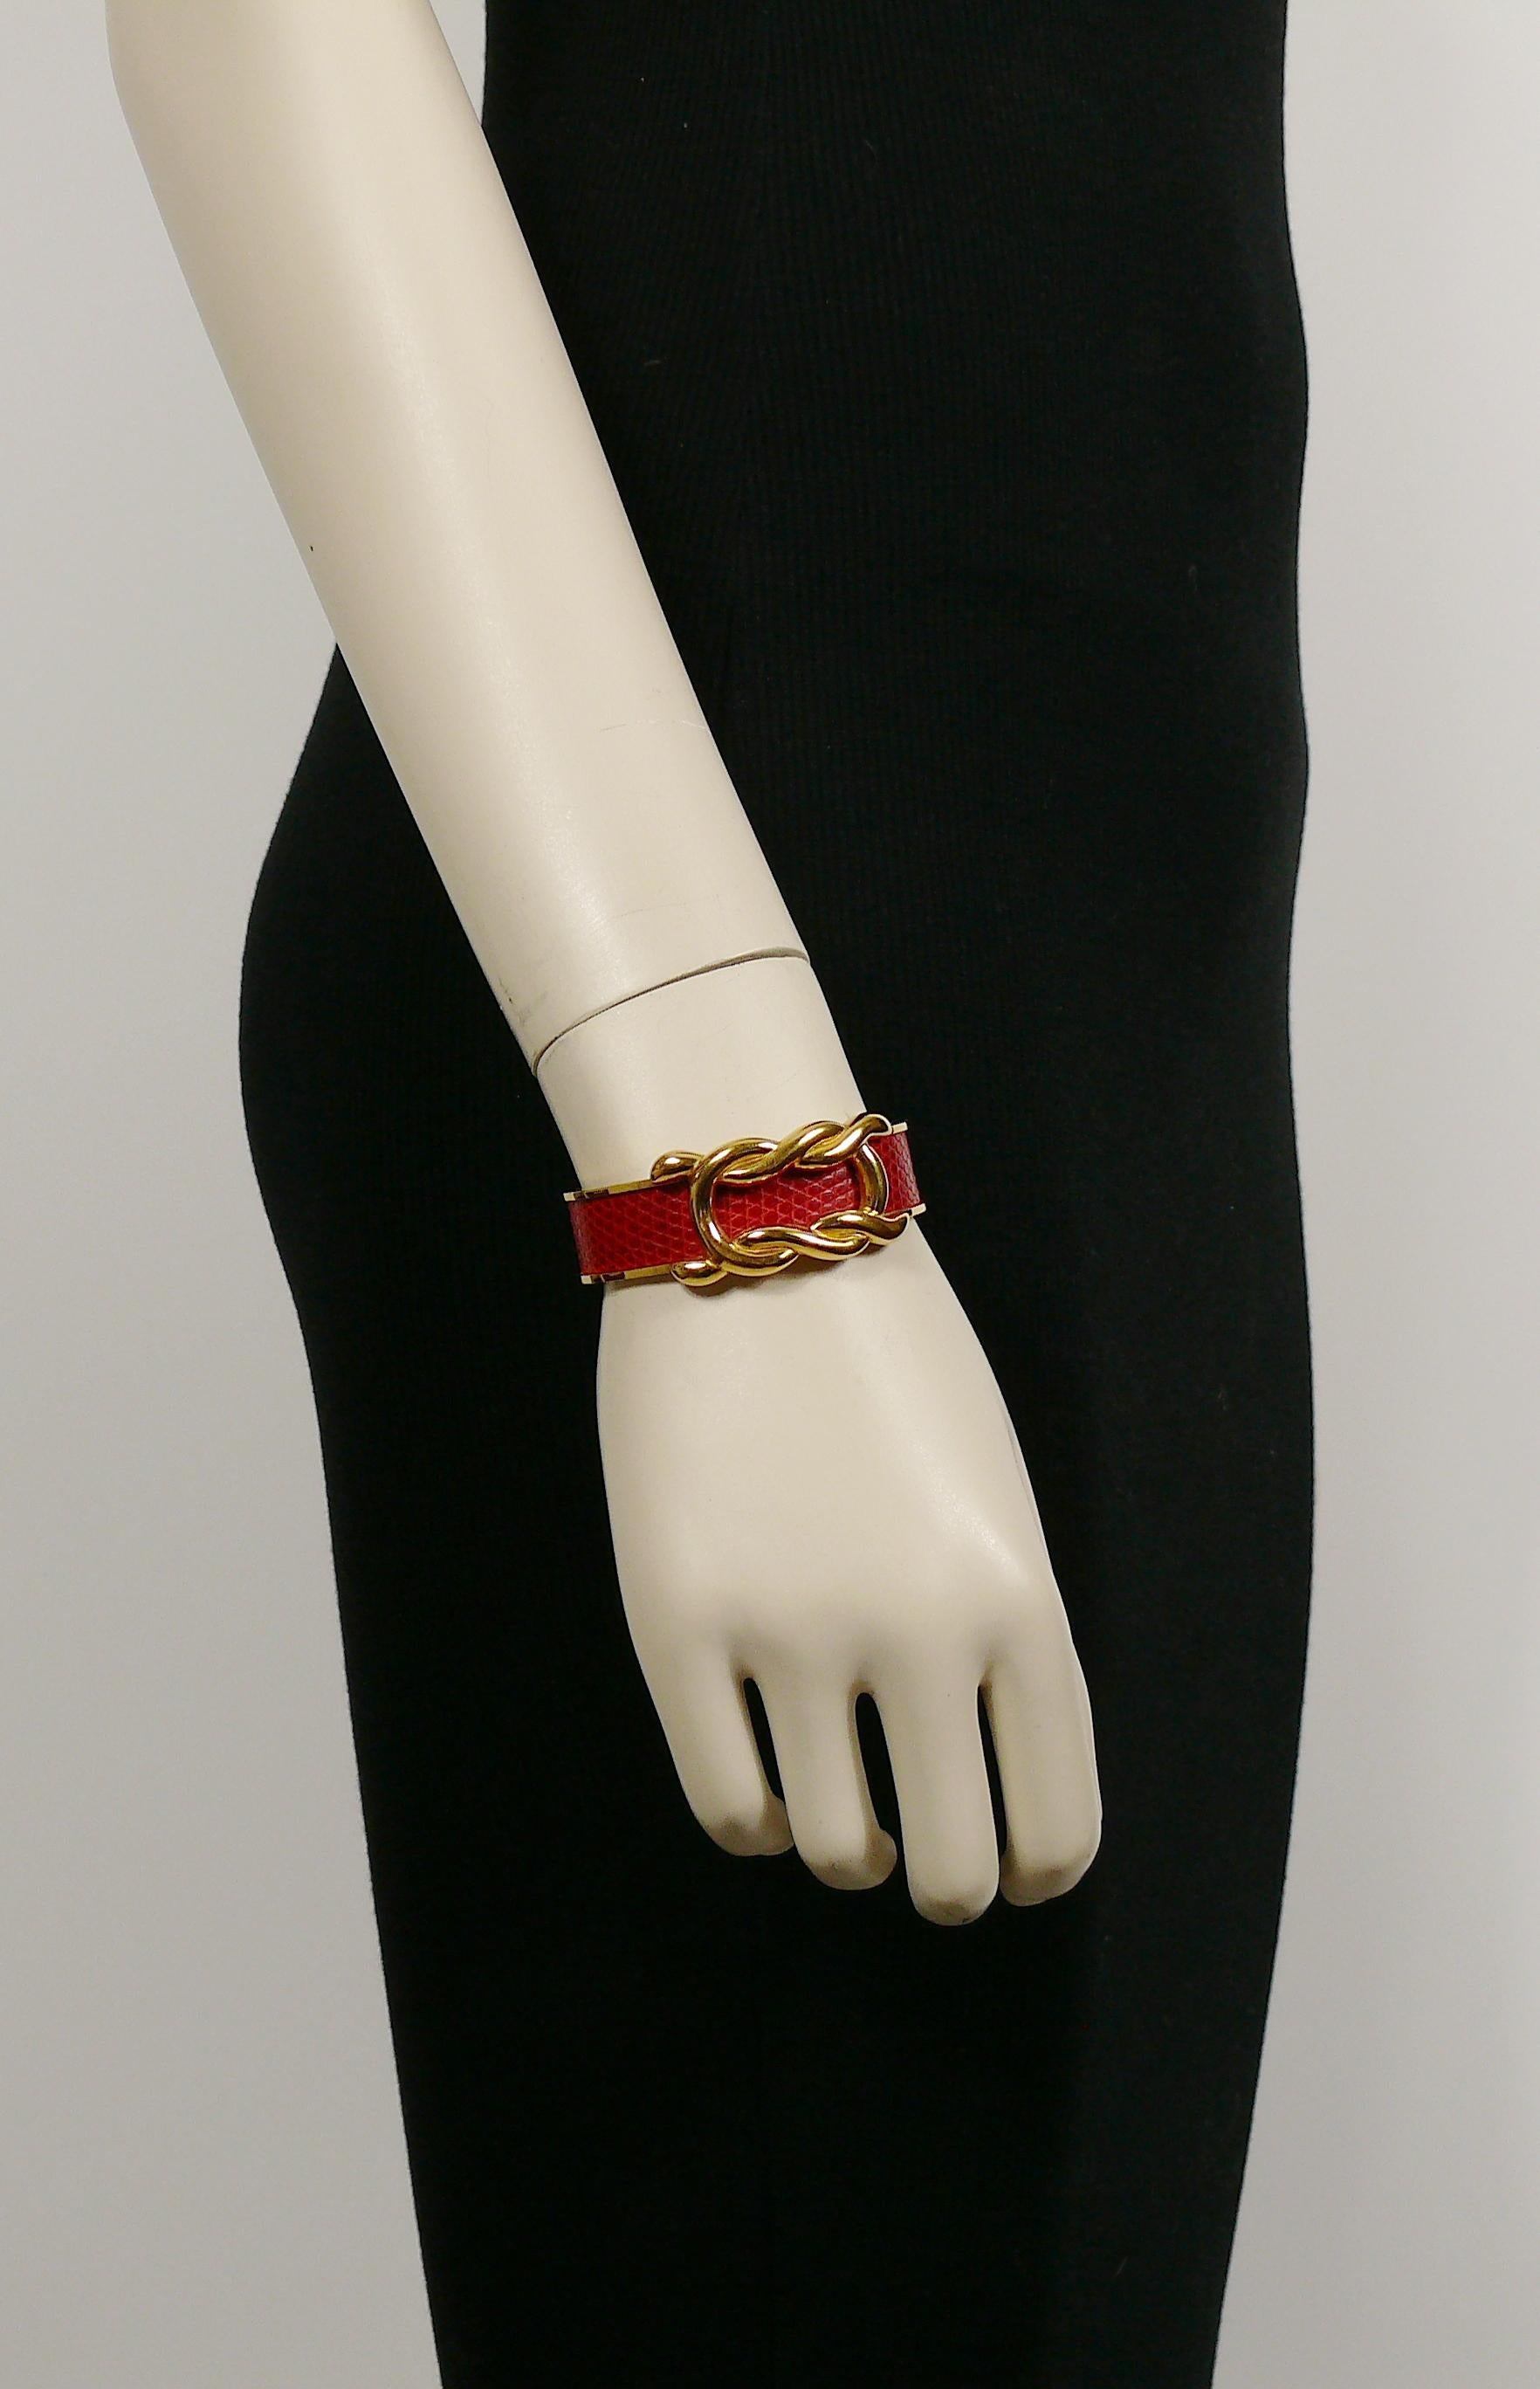 HERMES vintage gold toned and red leather cuff bracelet featuring a gorgeous knot design.

Embossed HERMES.
Maker's hallmark.

Indicative measurements : inner measurements 5.5 cm x 4.5 cm (2.17 inches x 1.77 inches) / max. width approx. 2.2 cm (0.87